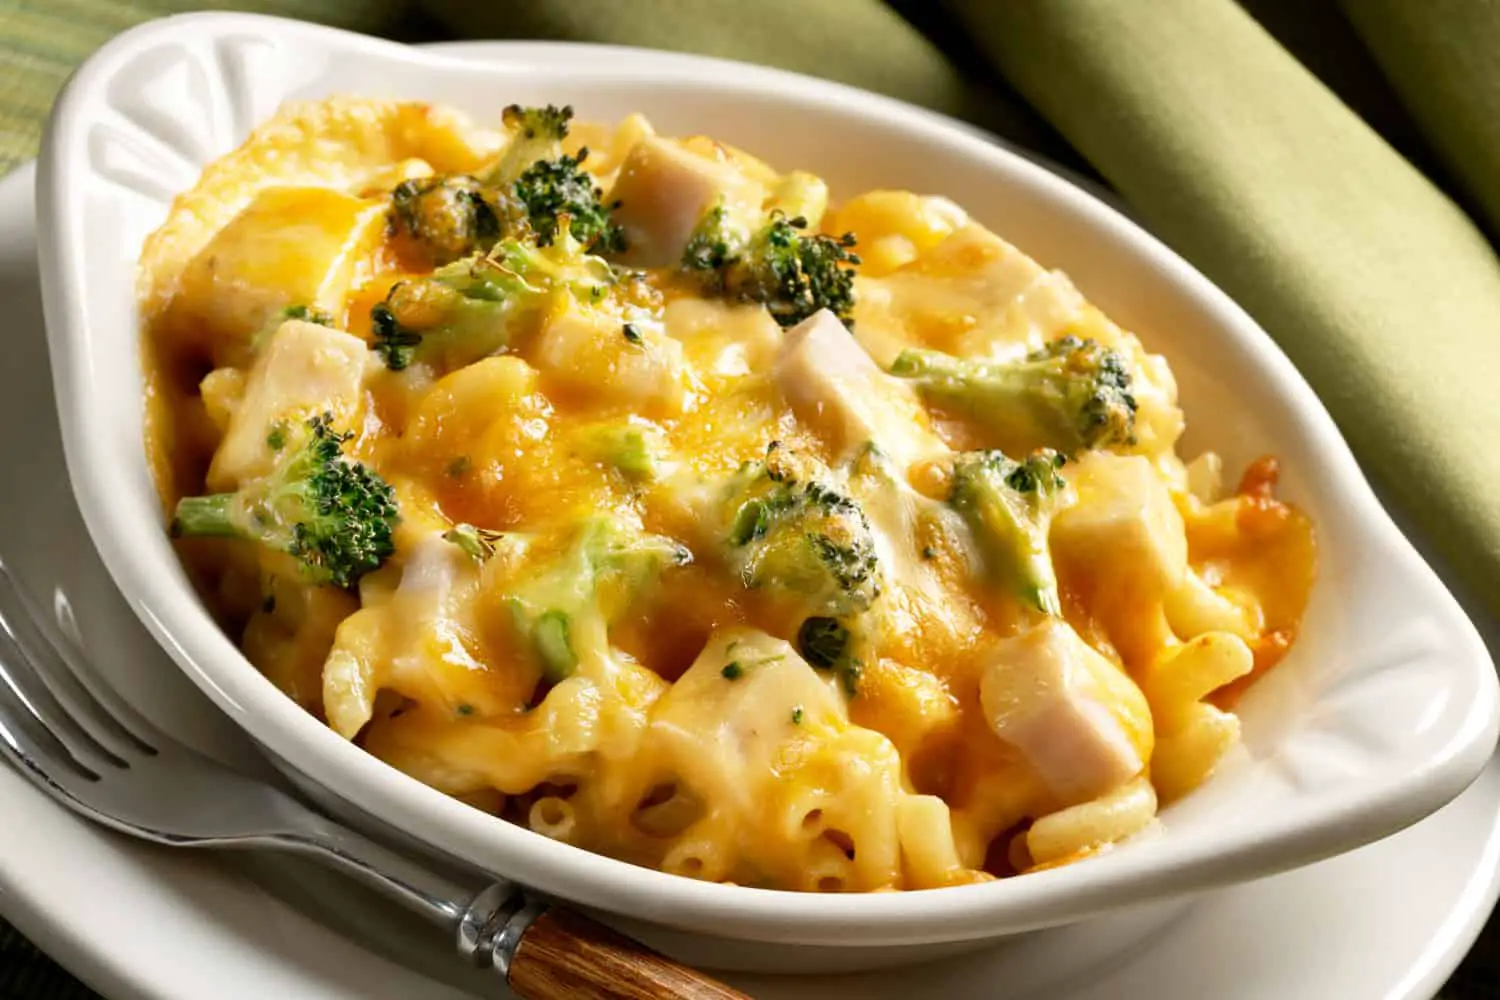 Can You Make Mac And Cheese Without Butter?